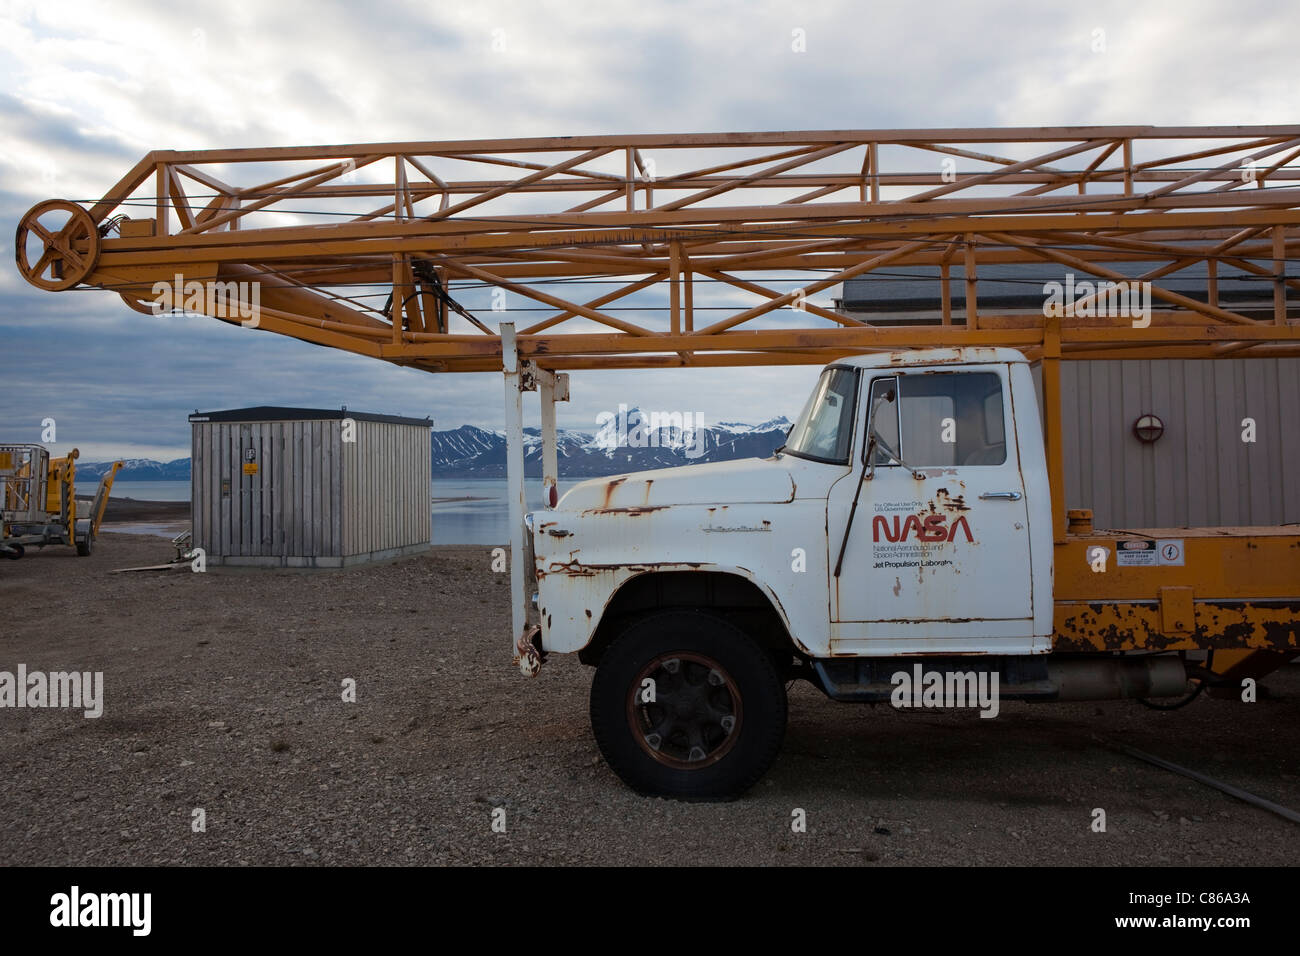 NASA truck parked at the space Geodetic Research Facility of the Norwegian Mapping Authority, Ny Alesund, Svalbard. Stock Photo